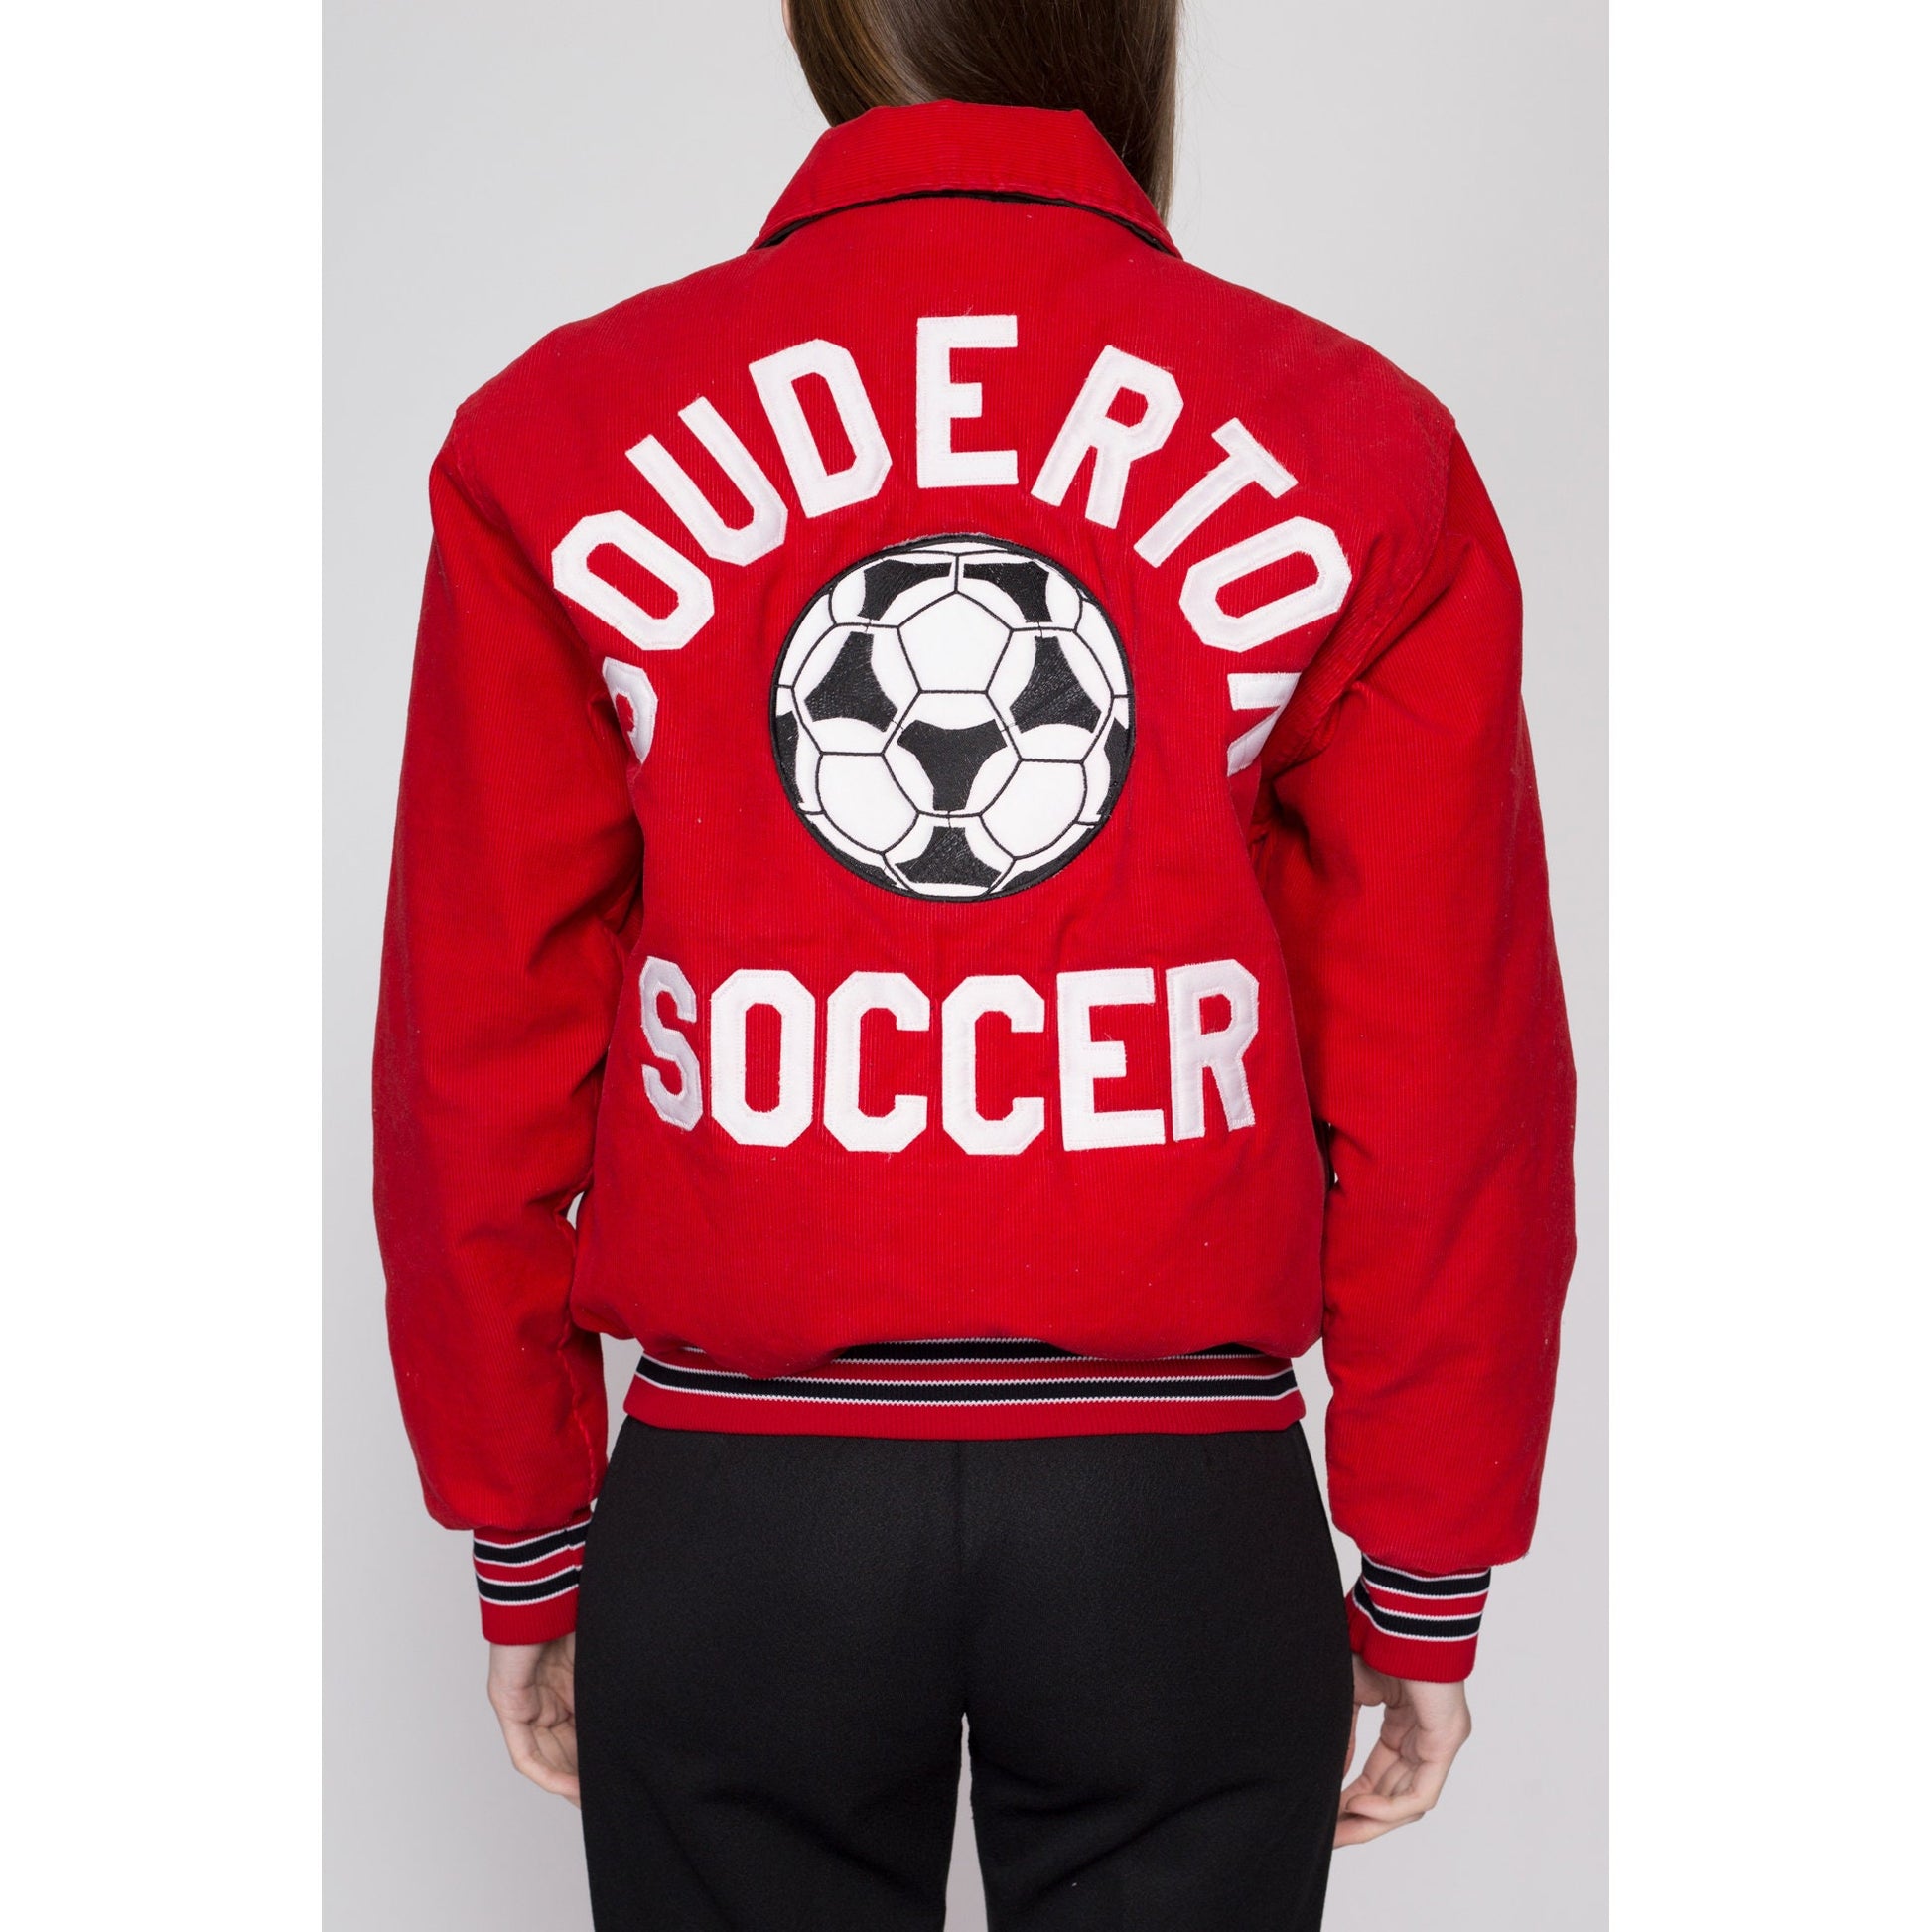 Small 80s Red Corduroy Soccer Team Varsity Jacket | Vintage Striped Trim Snap Button Athletic Bomber